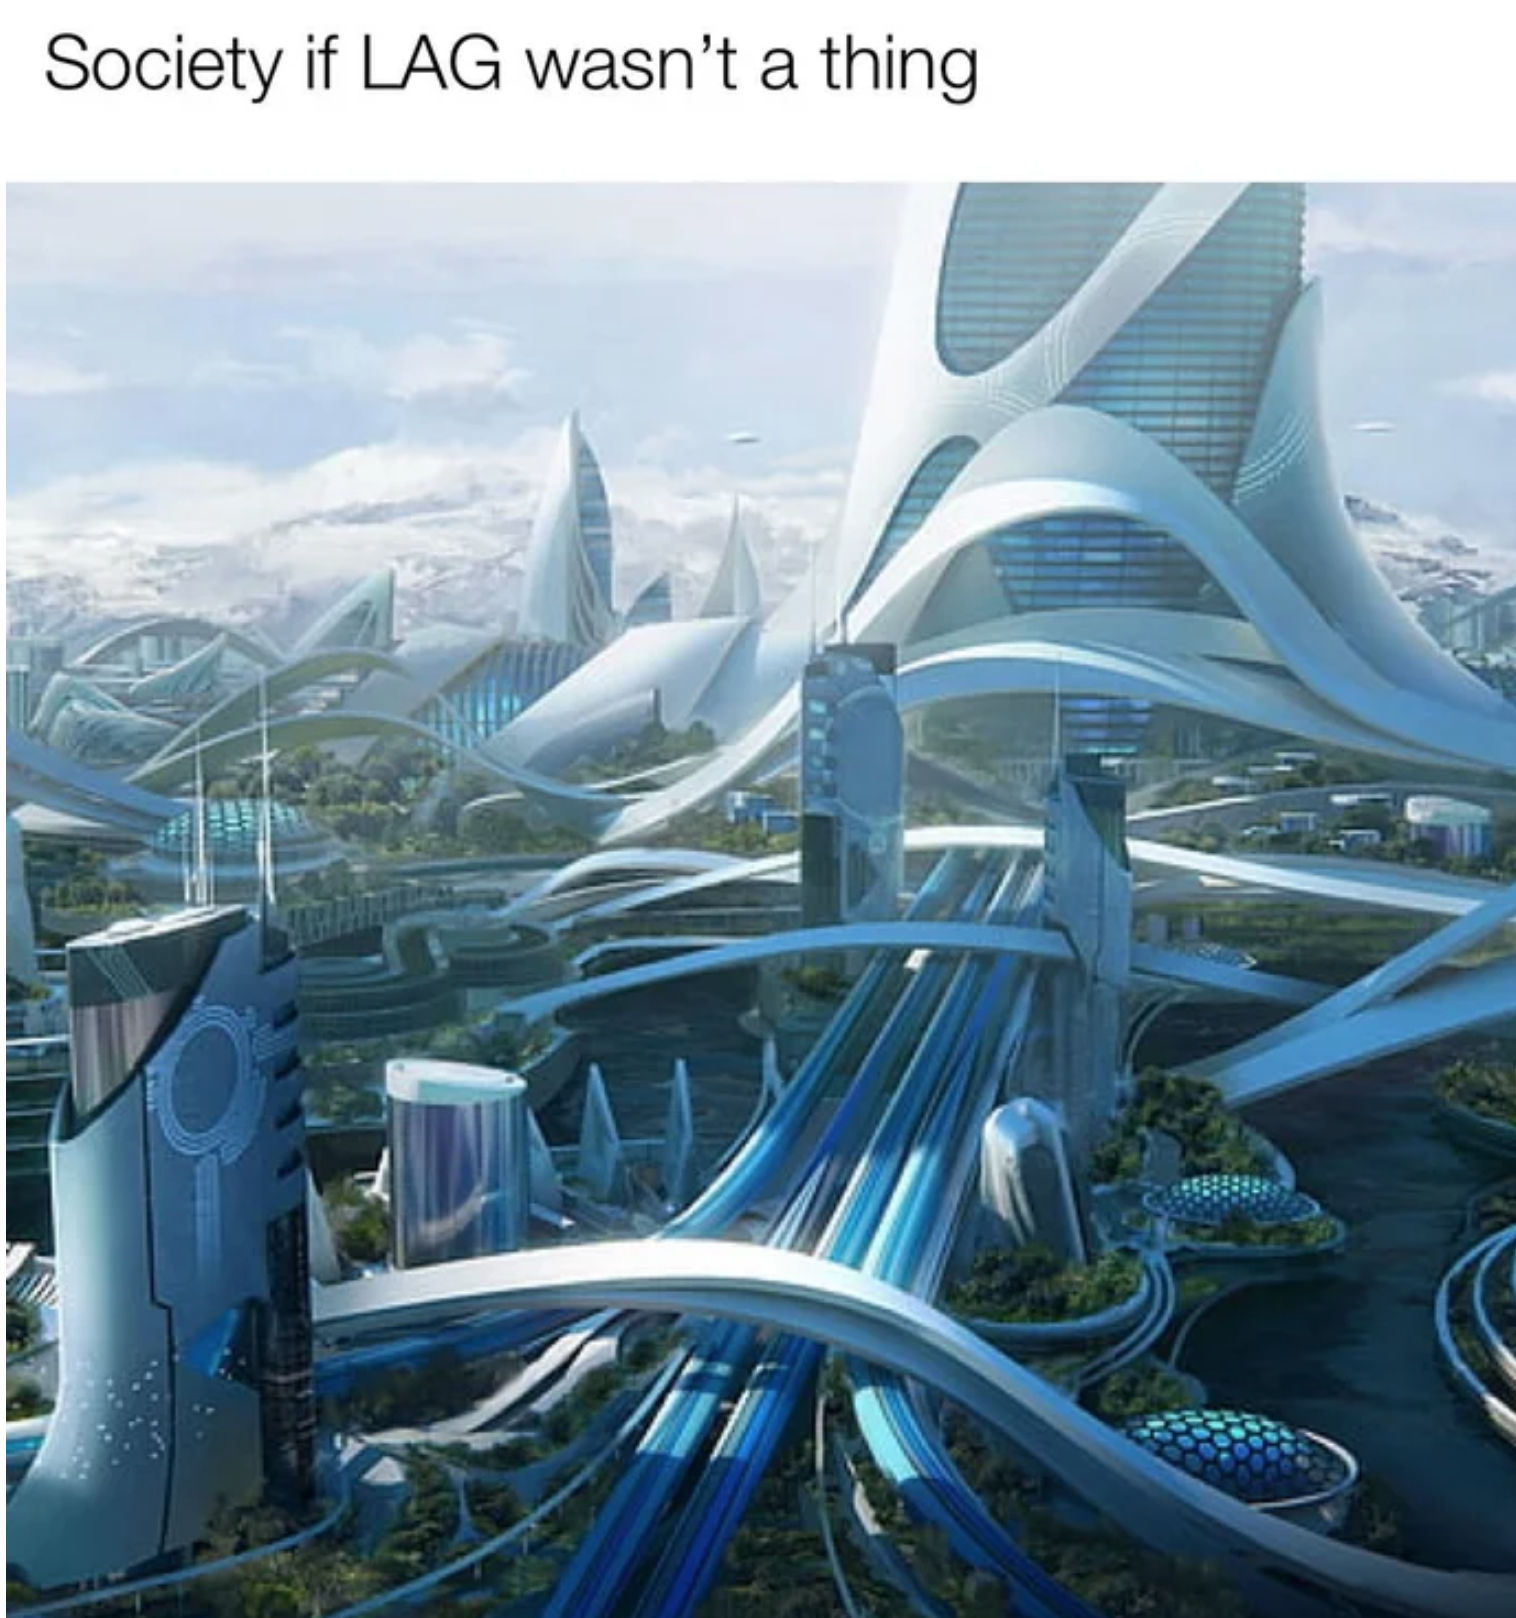 funny gaming memes - solarpunk background - Society if Lag wasn't a thing 48993